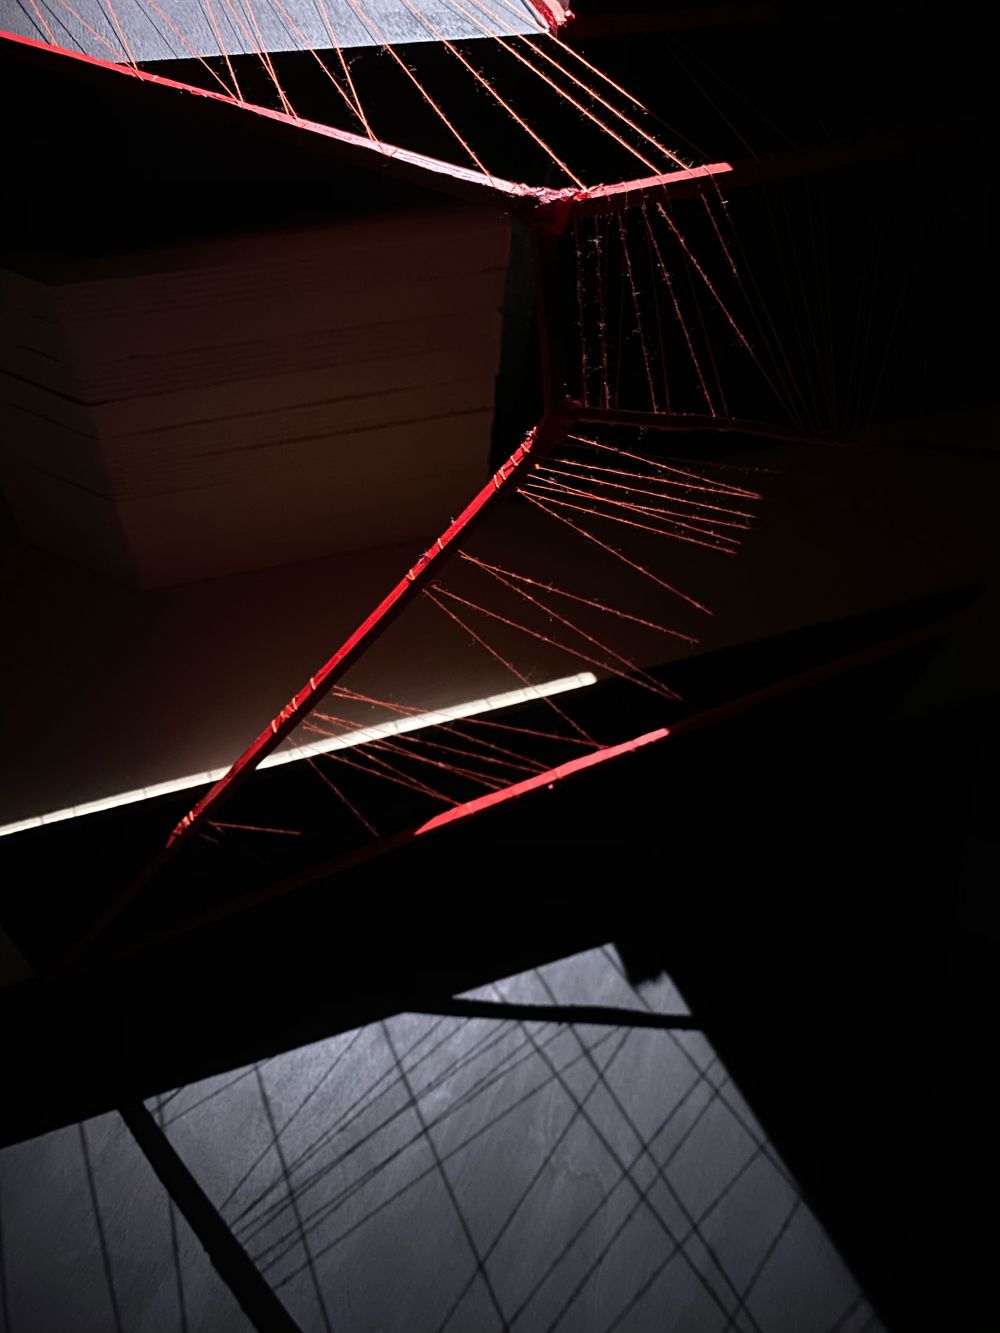 Model of structure made in card and red thread